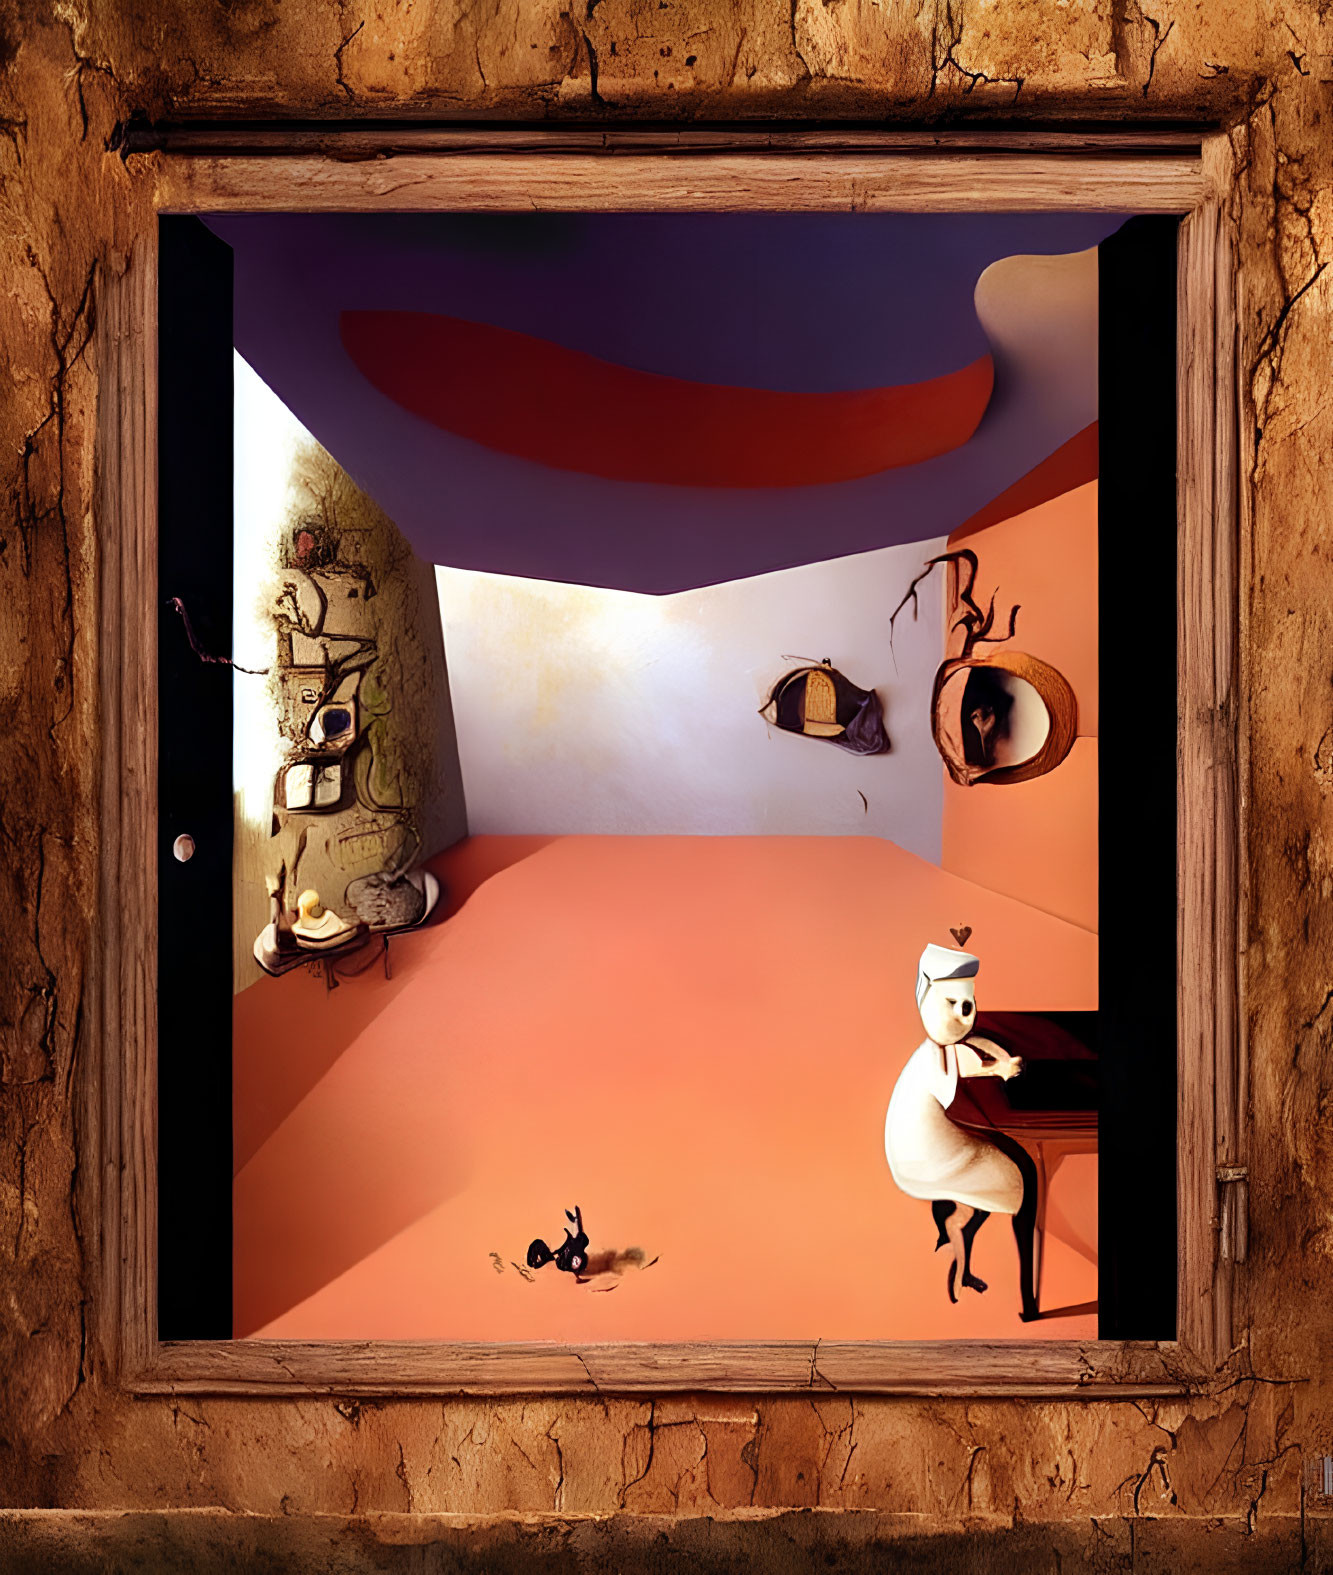 Abstract shapes and warm colors in surreal room with cat-like figure at piano